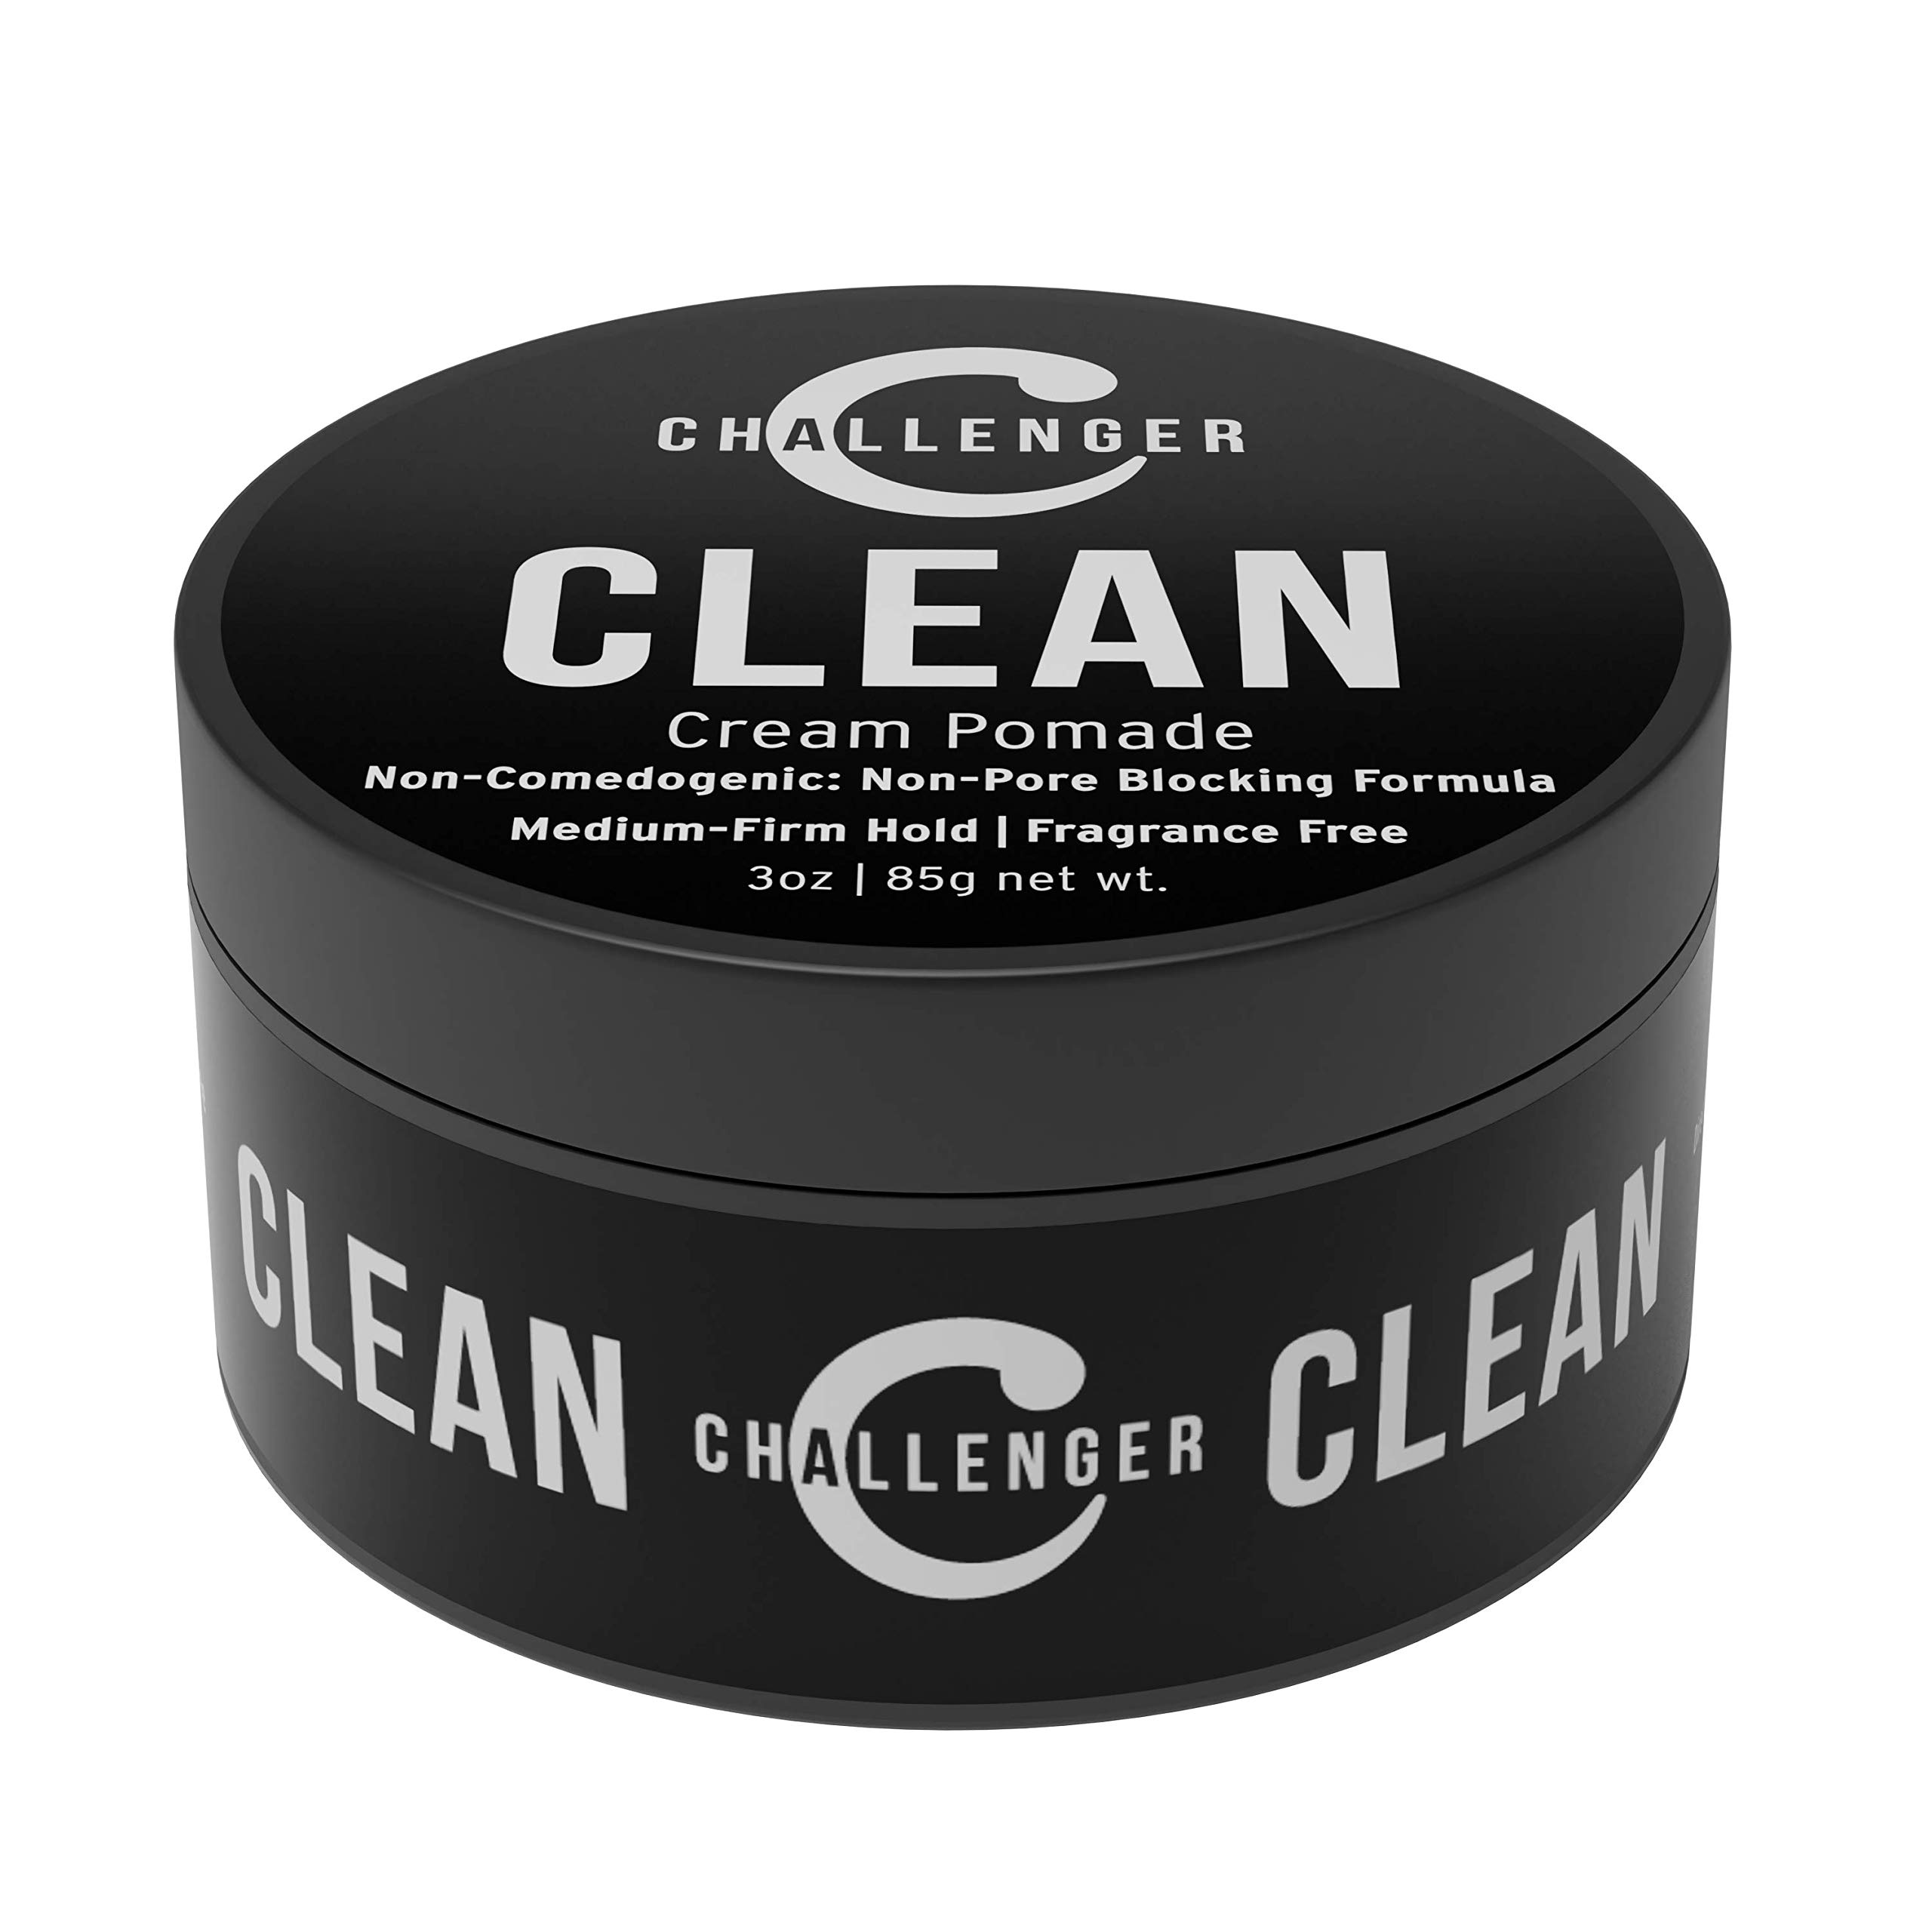 Challenger Mens Clean Cream Pomade, 3 Ounce | Fragrance Free,  Non-Comedogenic Hair Styling Product | Medium Firm Hold & Natural Finish |  Shine Free, Unscented, Water Based & Travel Friendly 3 Ounce (Pack of 1)